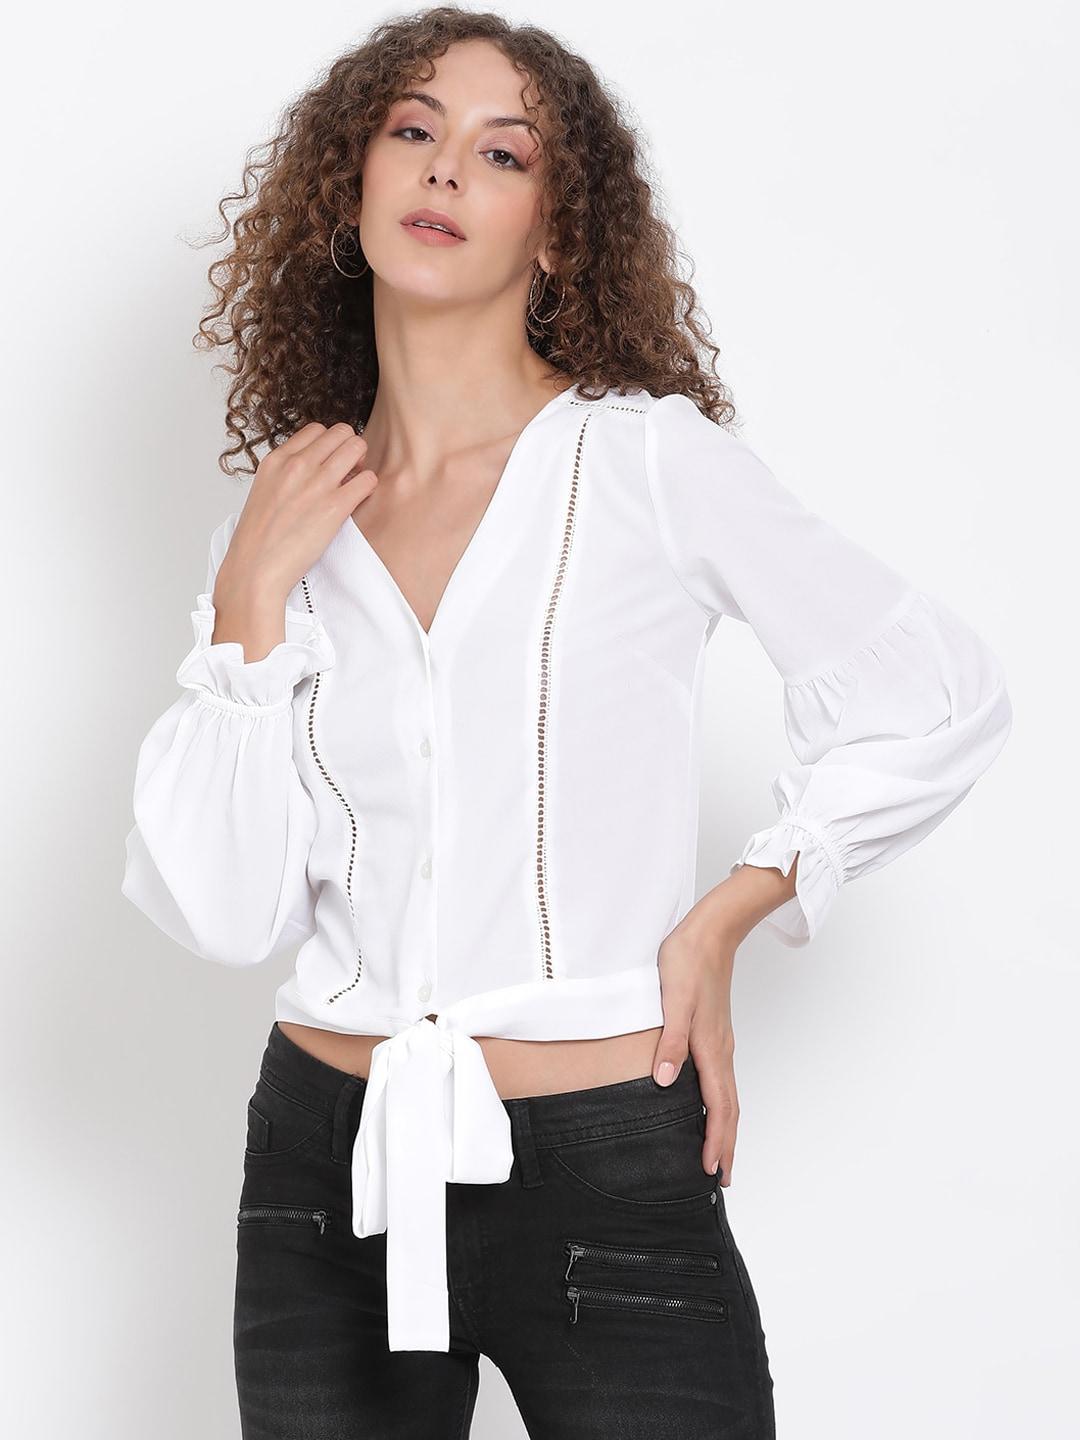 oxolloxo white solid shirt style crop top